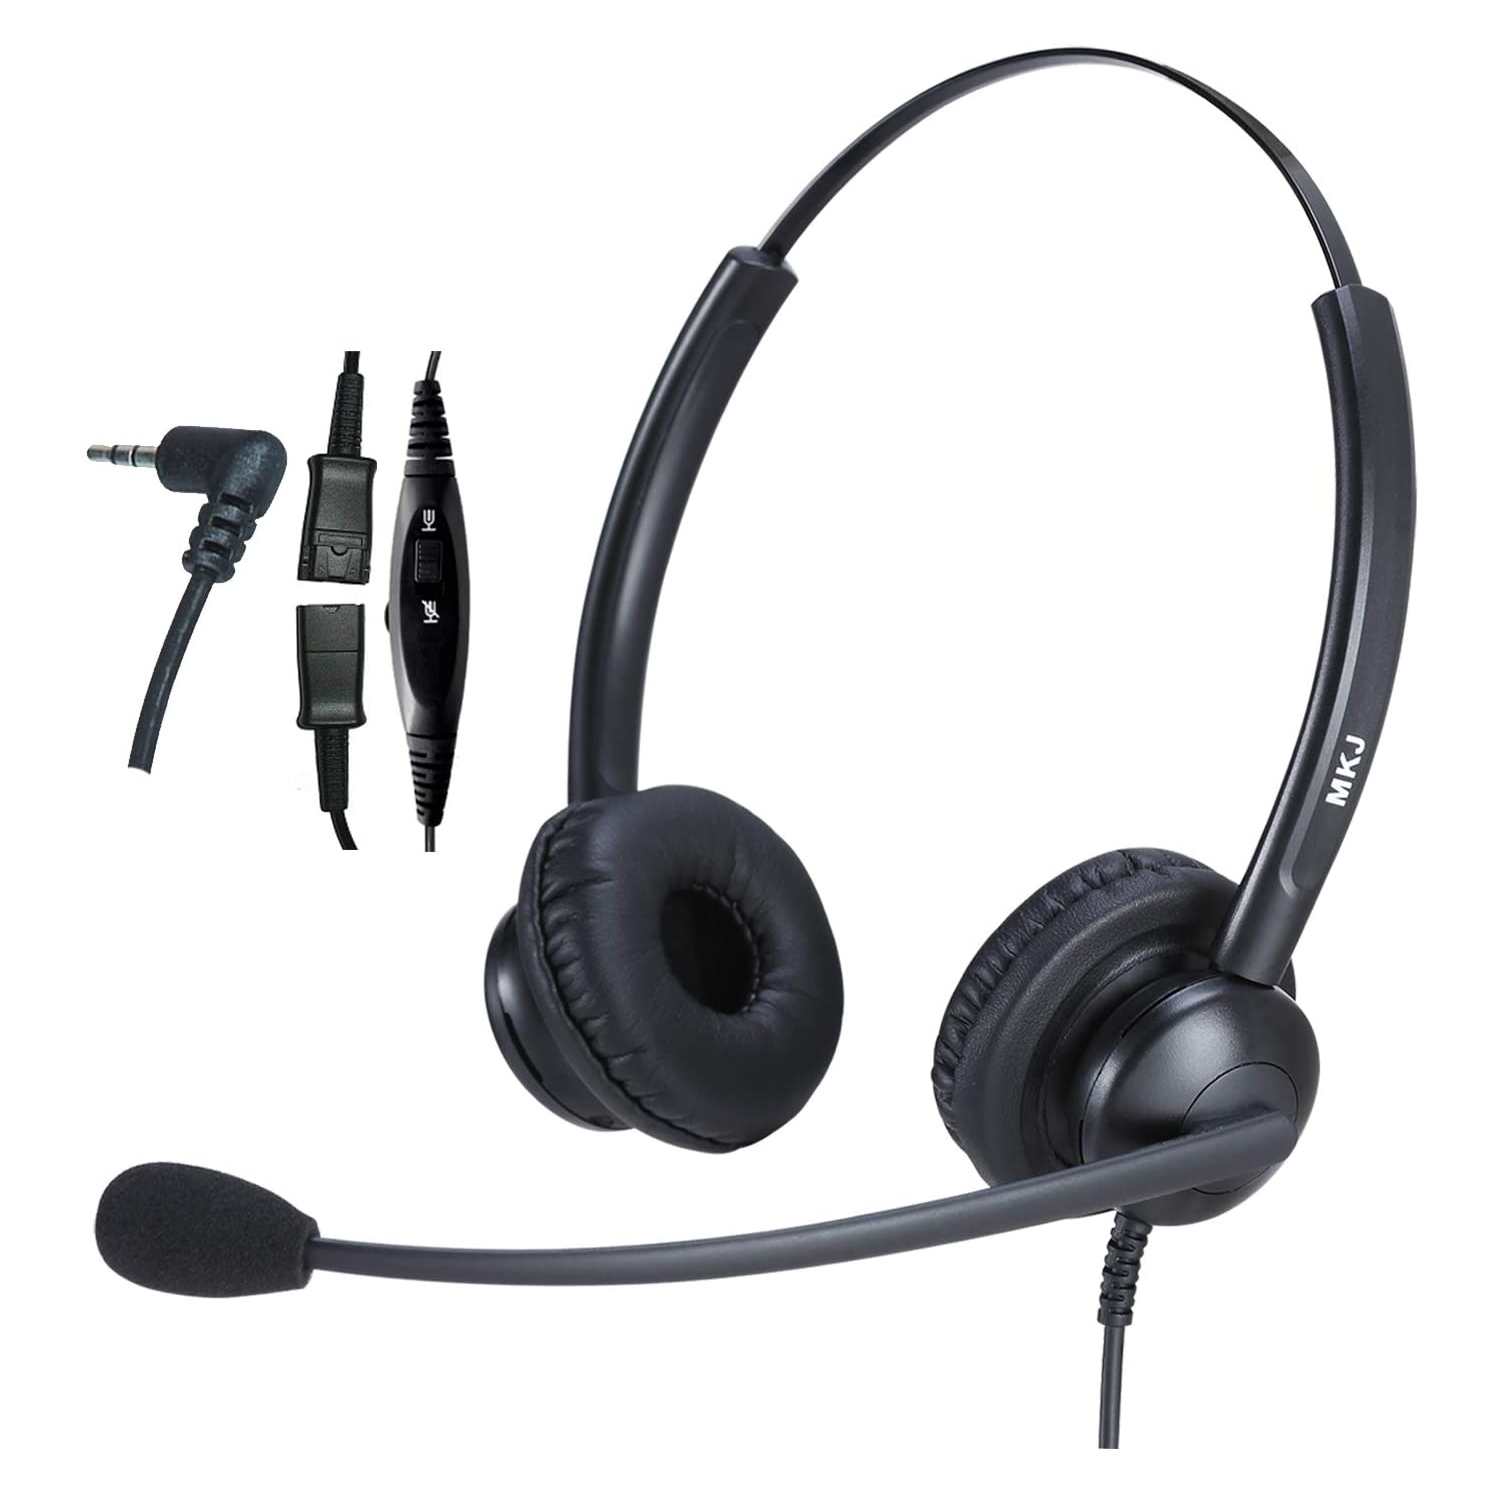 2.5mm Headset for Panasonic DECT Cordless Phone KX-TCA430 KX-TGF574 Corded Call Center Office Telephone Headset